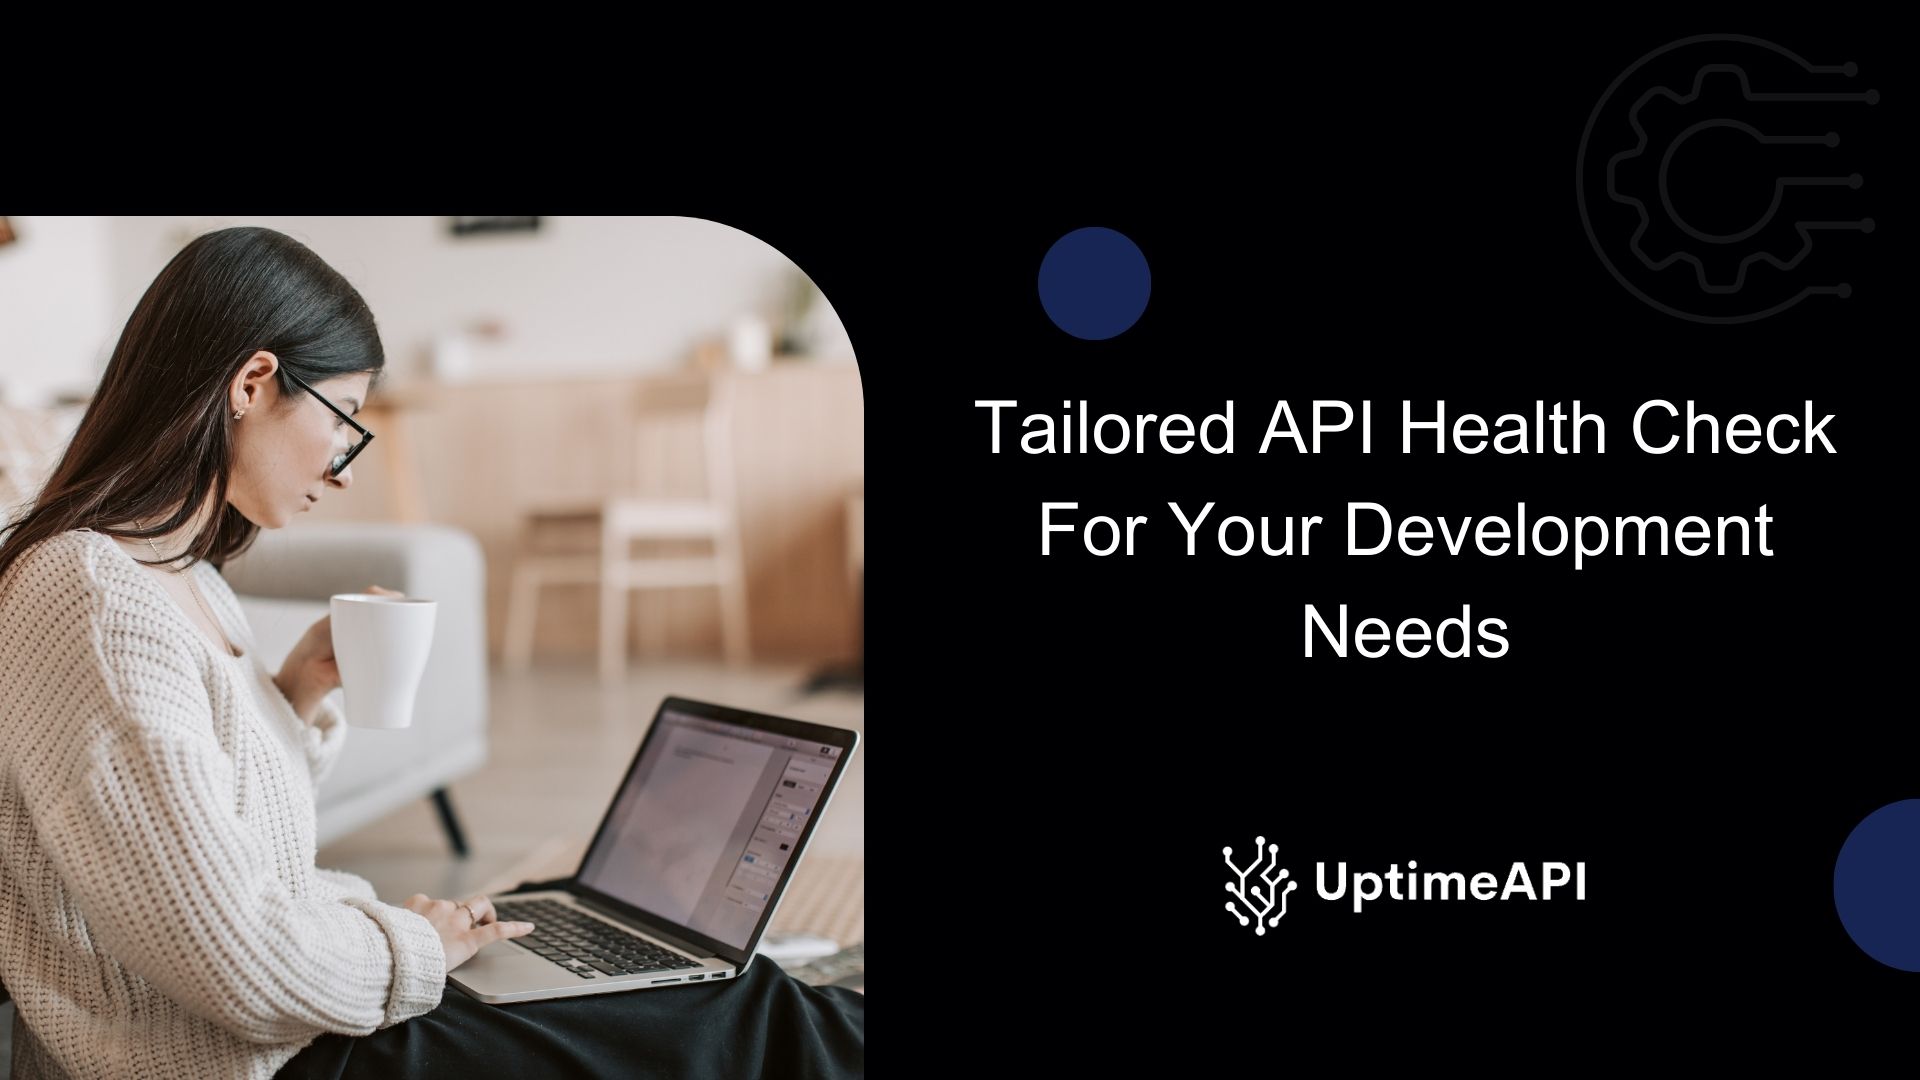 Tailored API Health Check For Your Development Needs